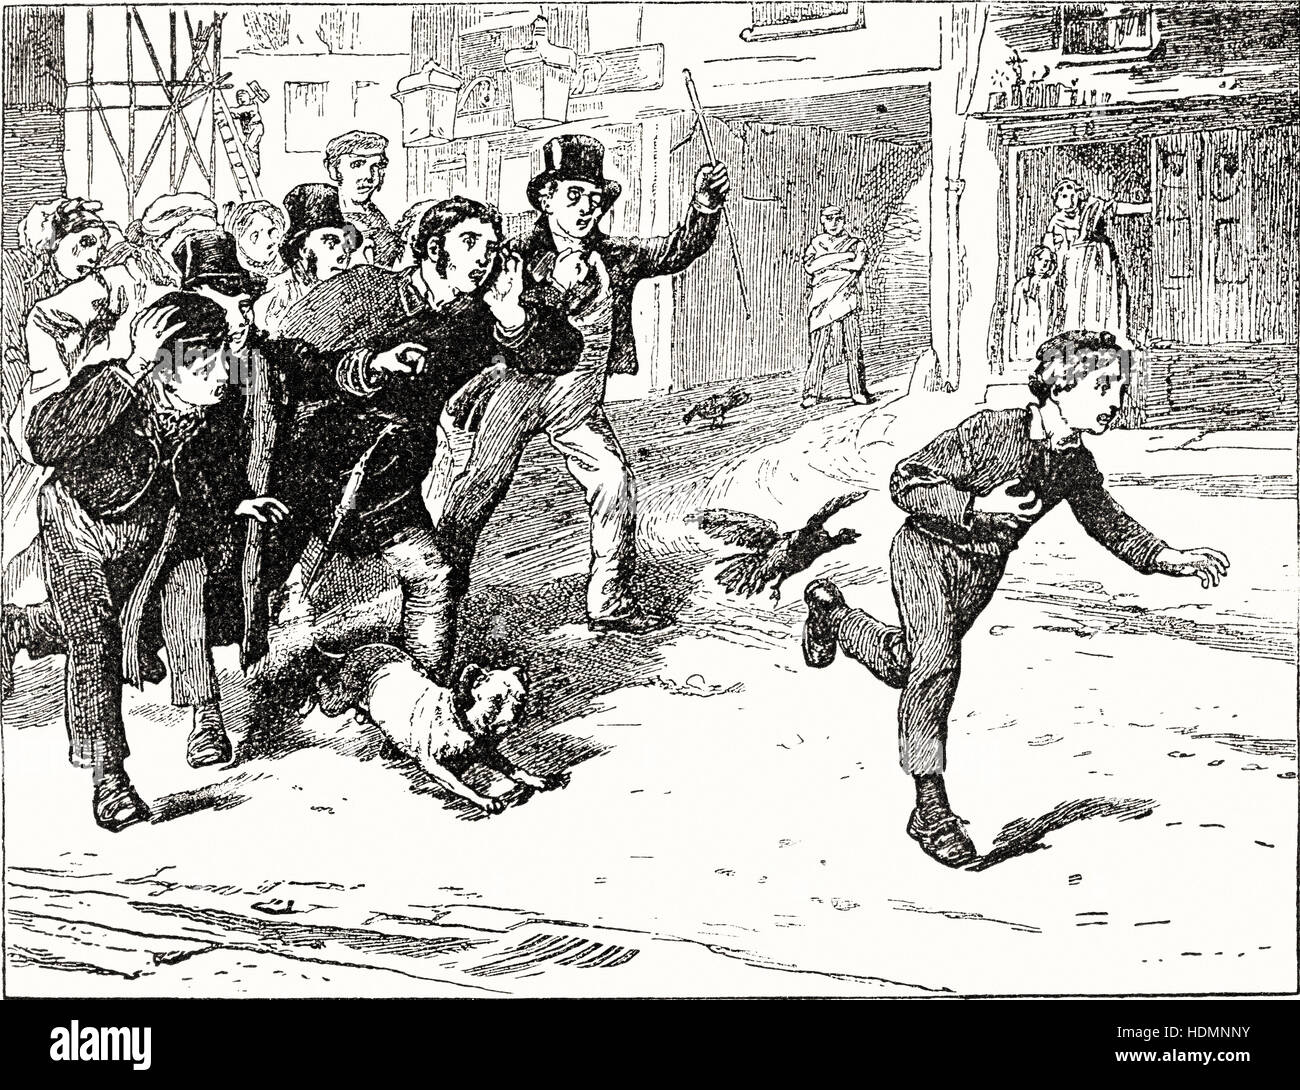 Charles Dickens - Oliver Twist - swedish edition - Page 050 Stock Photo